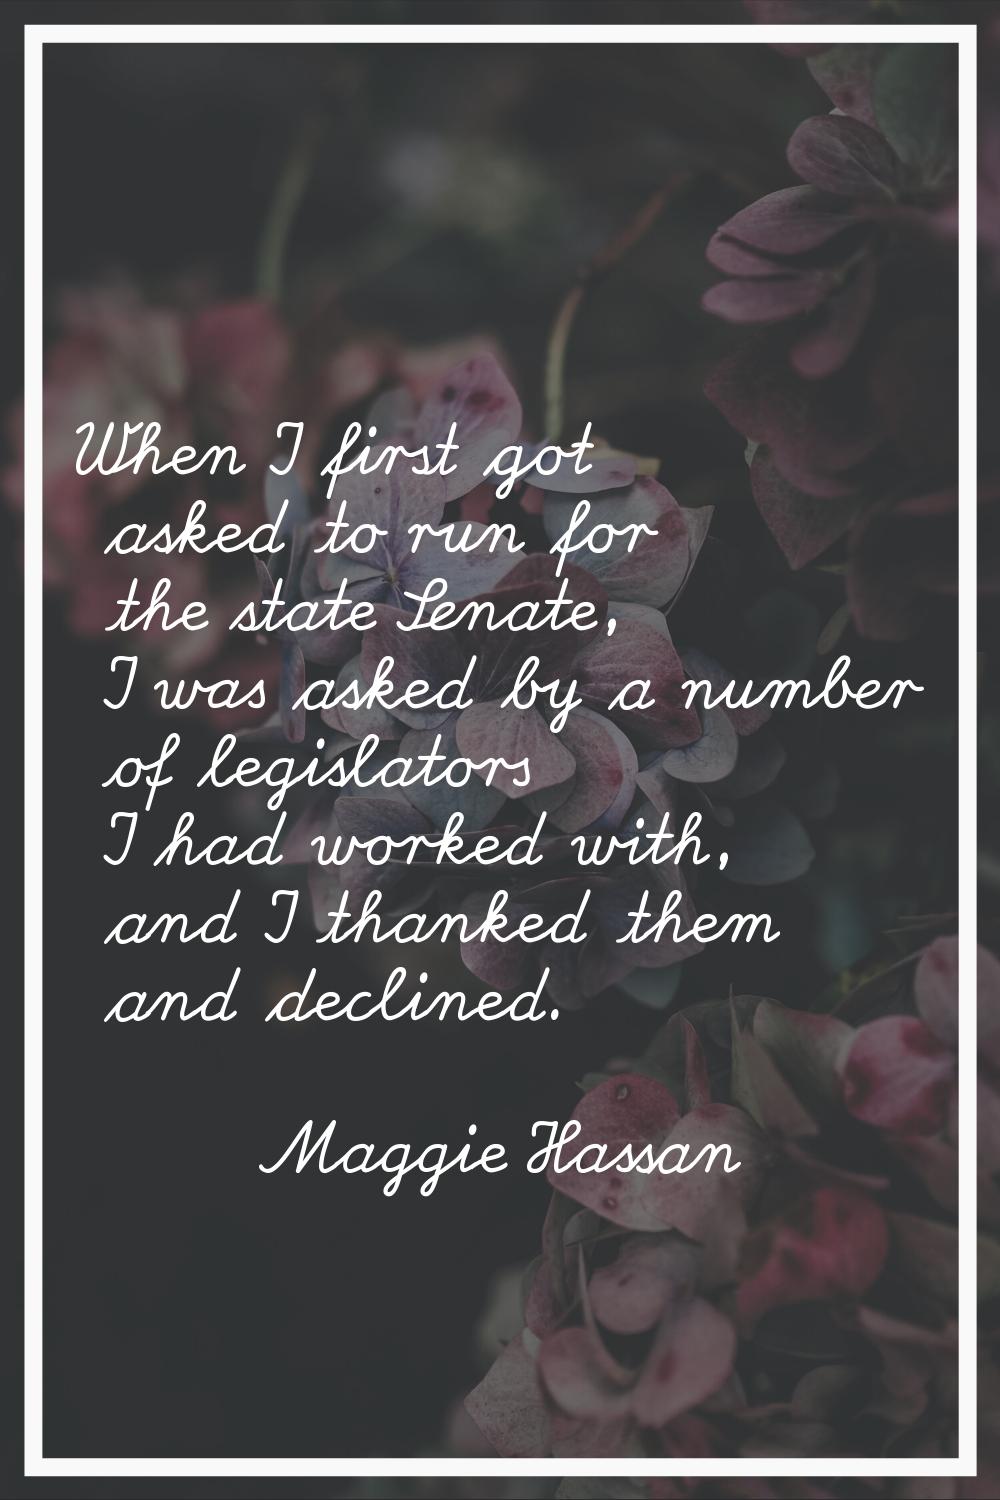 When I first got asked to run for the state Senate, I was asked by a number of legislators I had wo